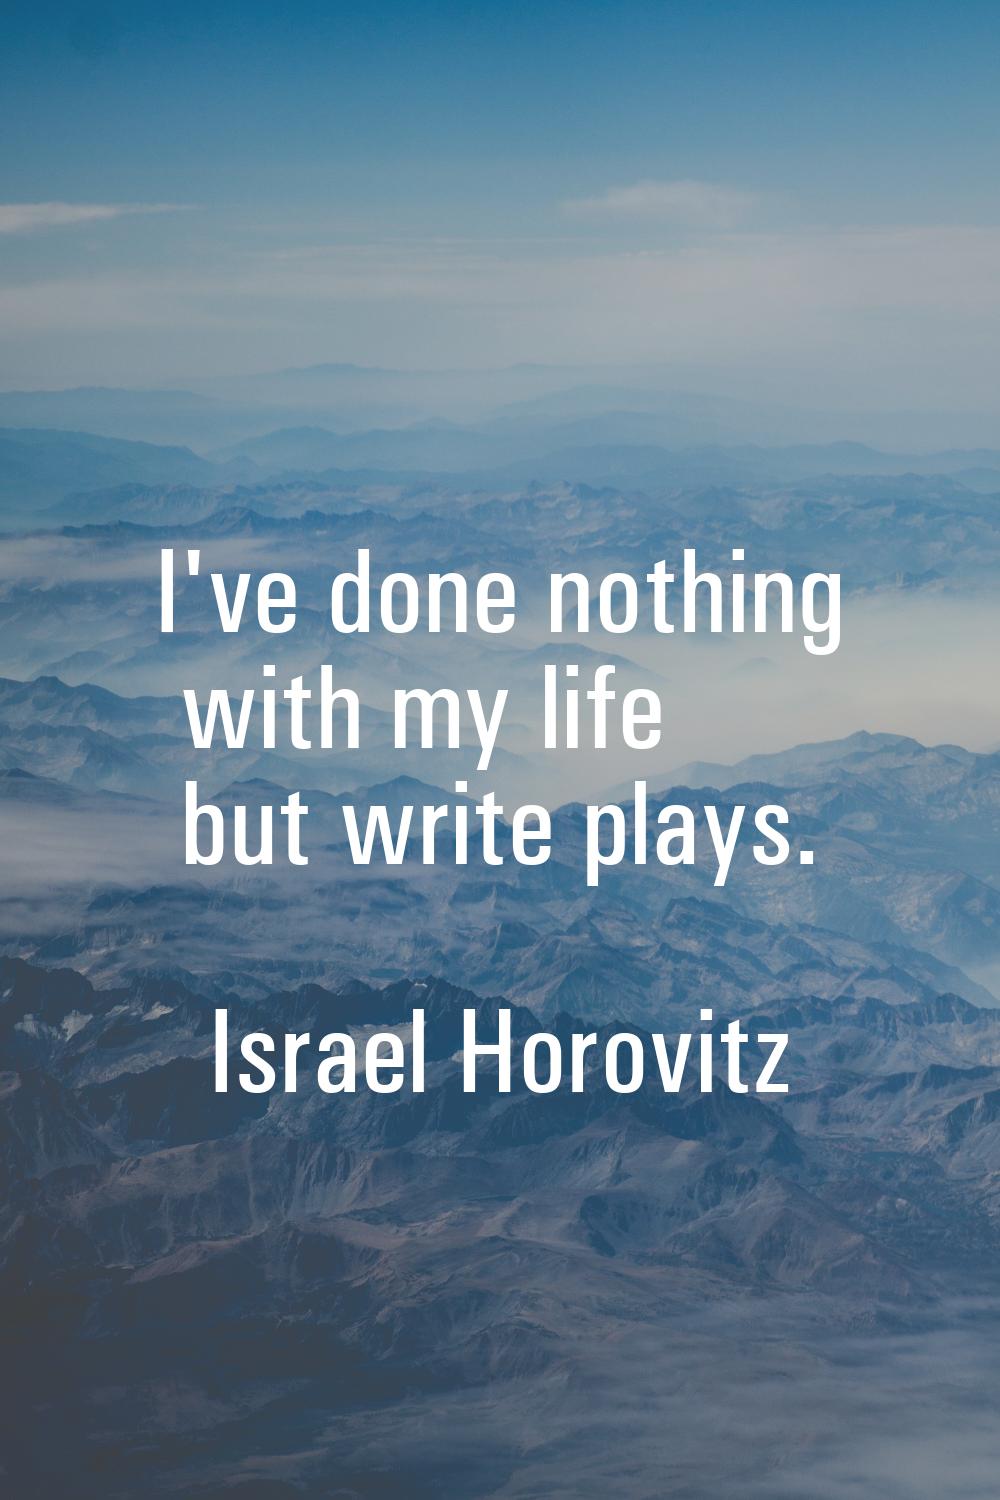 I've done nothing with my life but write plays.